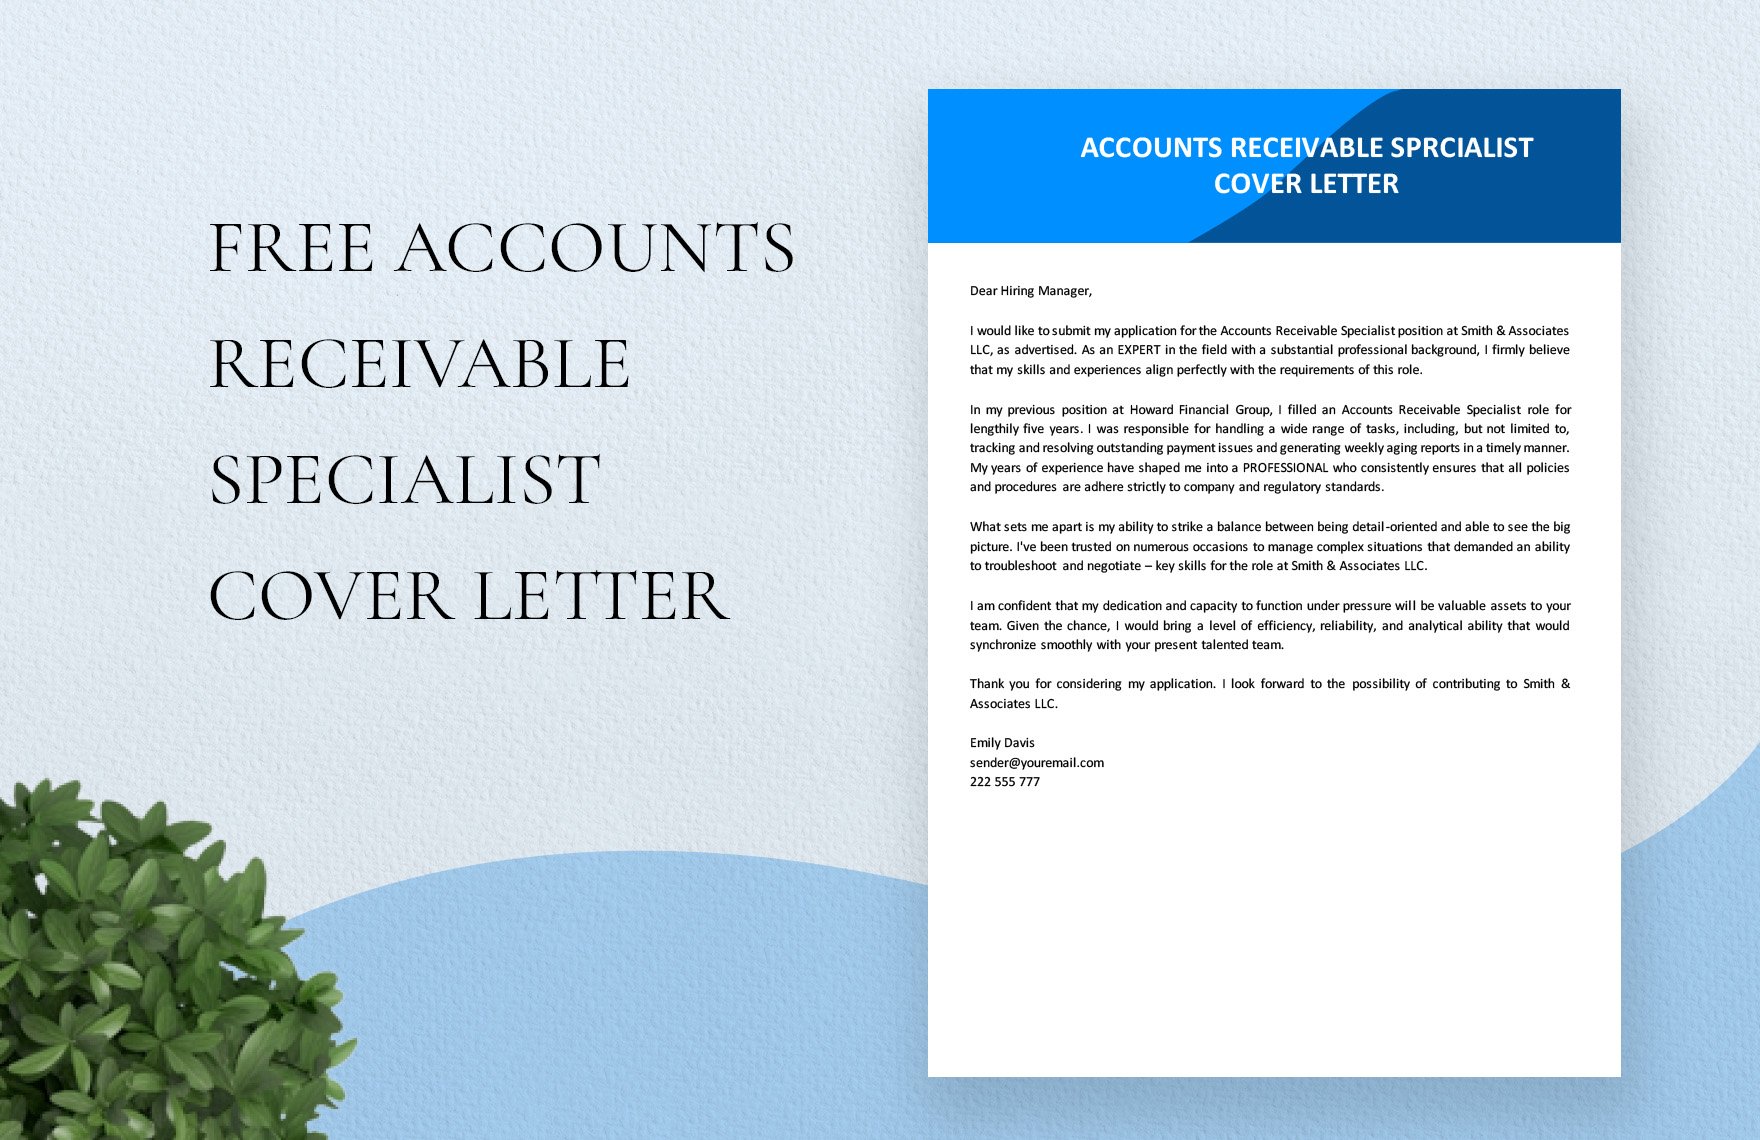 Accounts Receivable Specialist Cover Letter